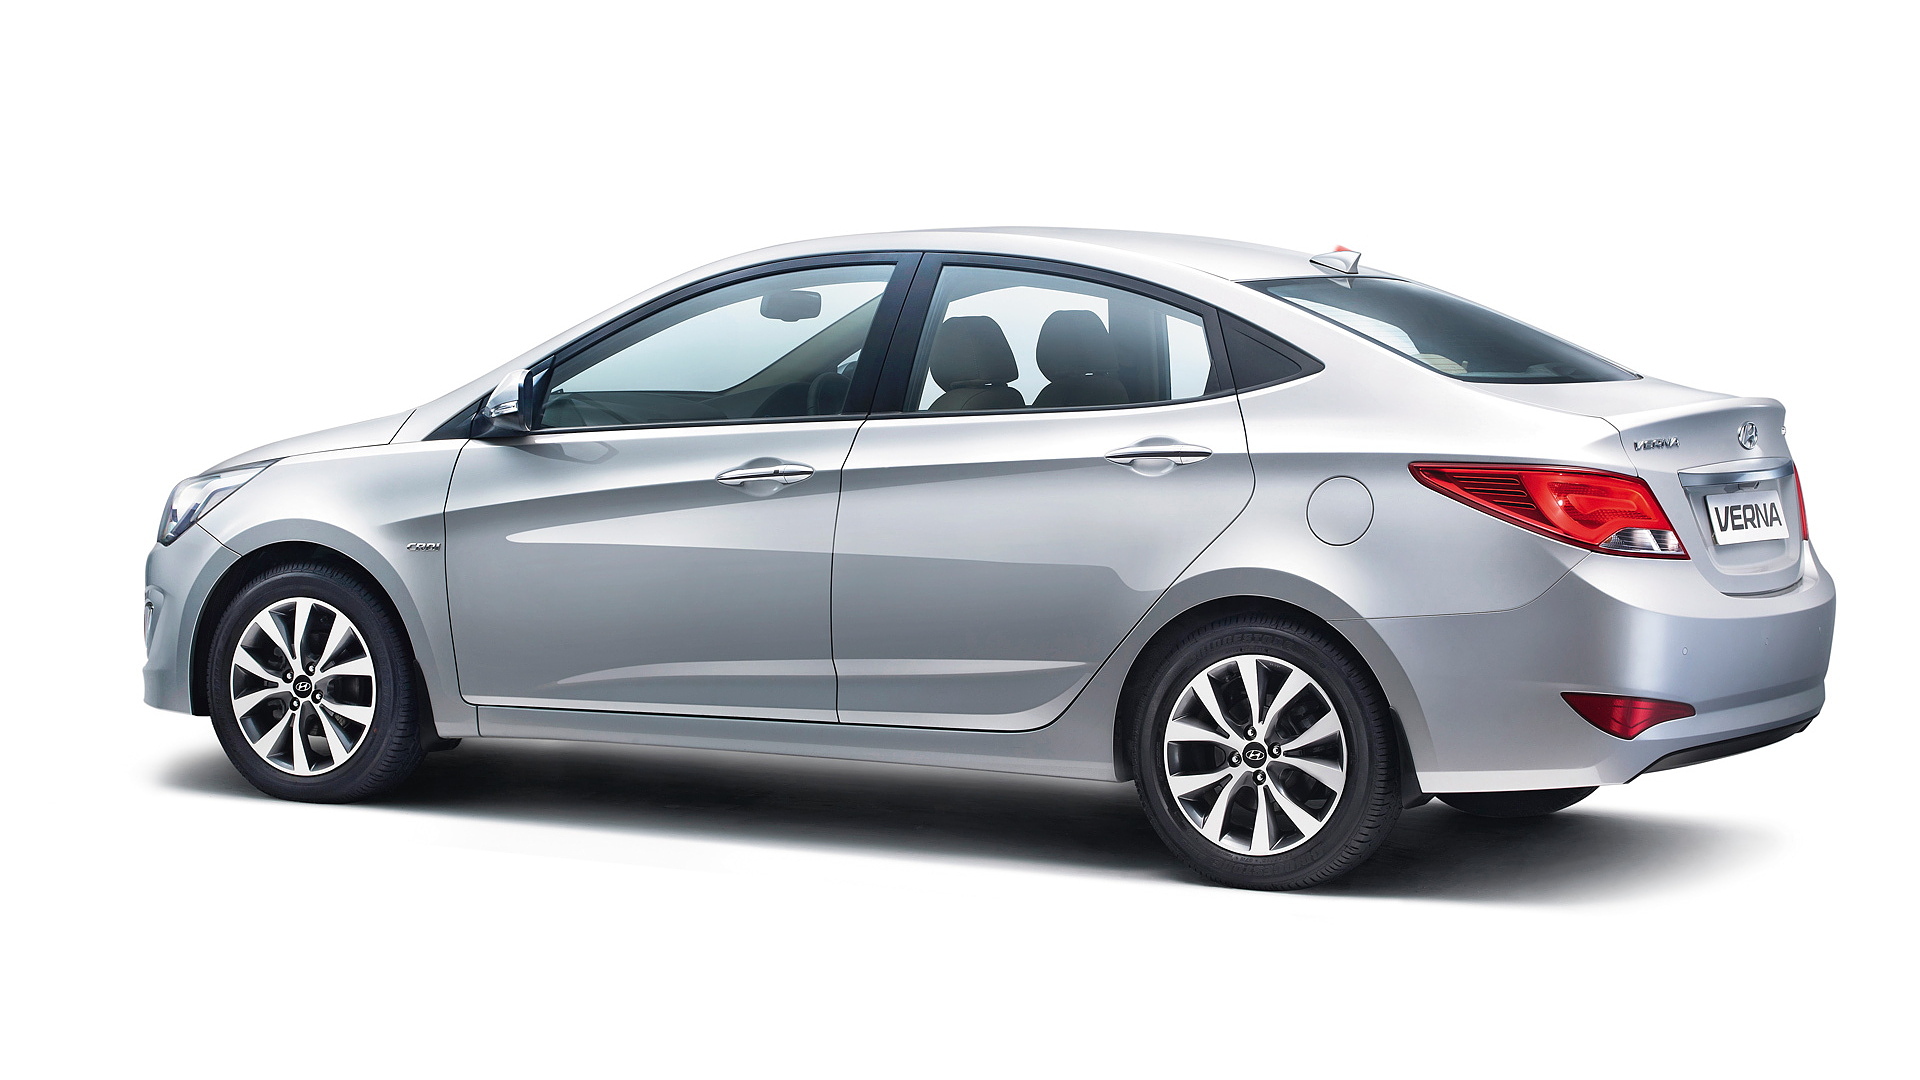 Discontinued Hyundai Verna [2015-2017] Price, Images, Colours & Reviews -  CarWale